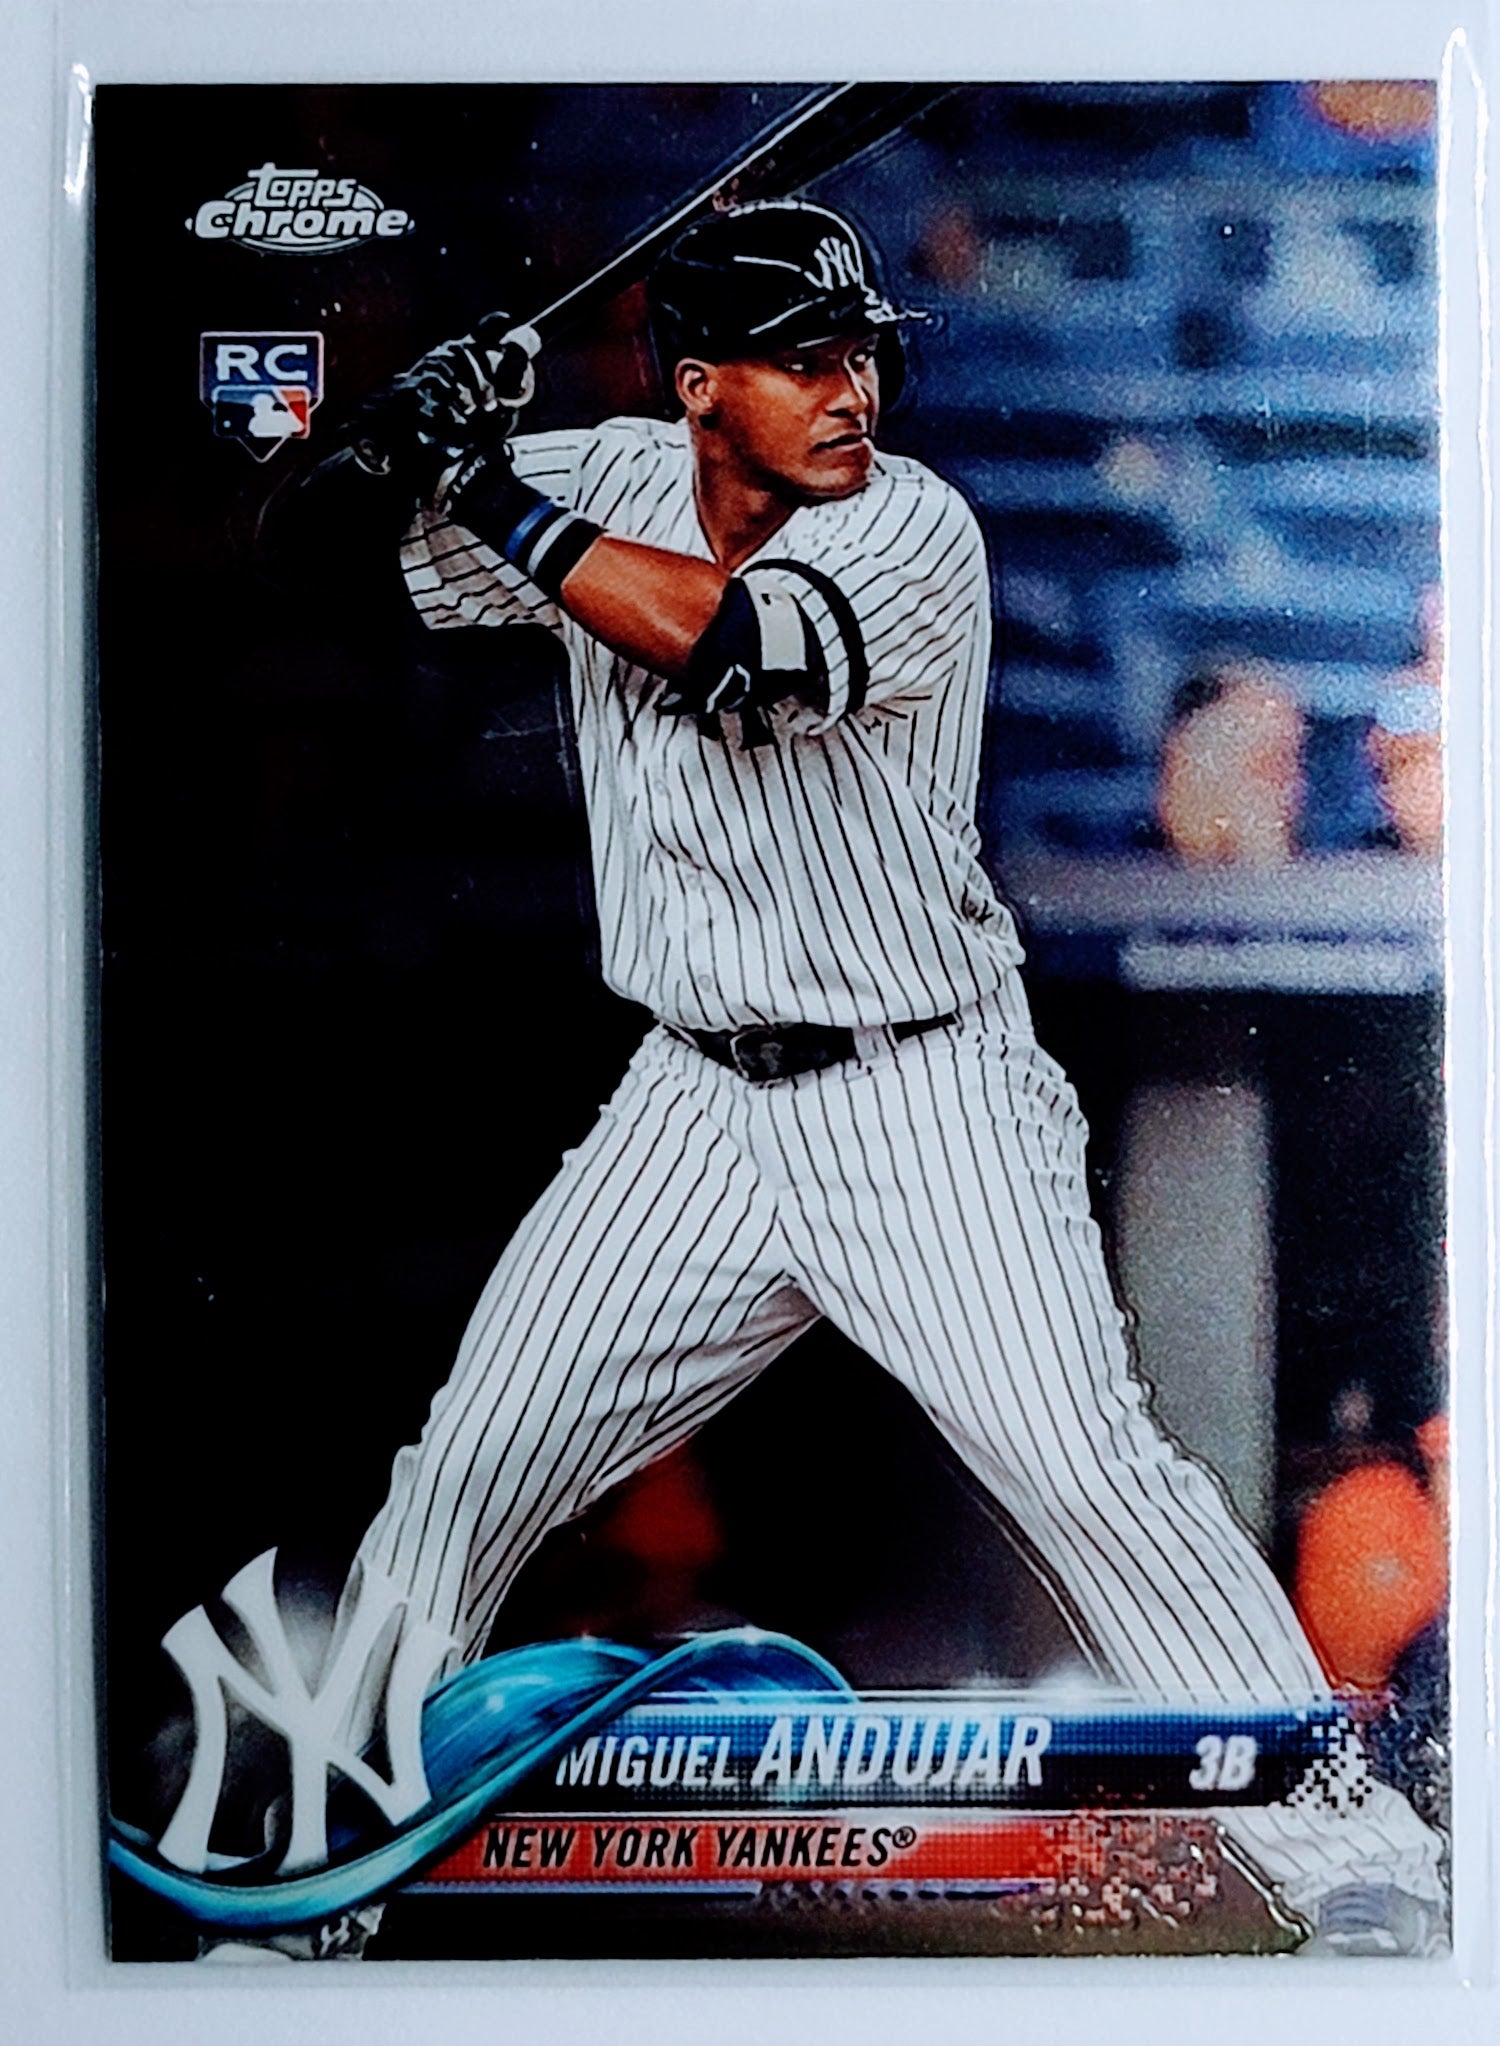 2018 Topps Chrome Miguel
  Andujar   RC New York Yankees Baseball
  Card  TH1CB_1c simple Xclusive Collectibles   